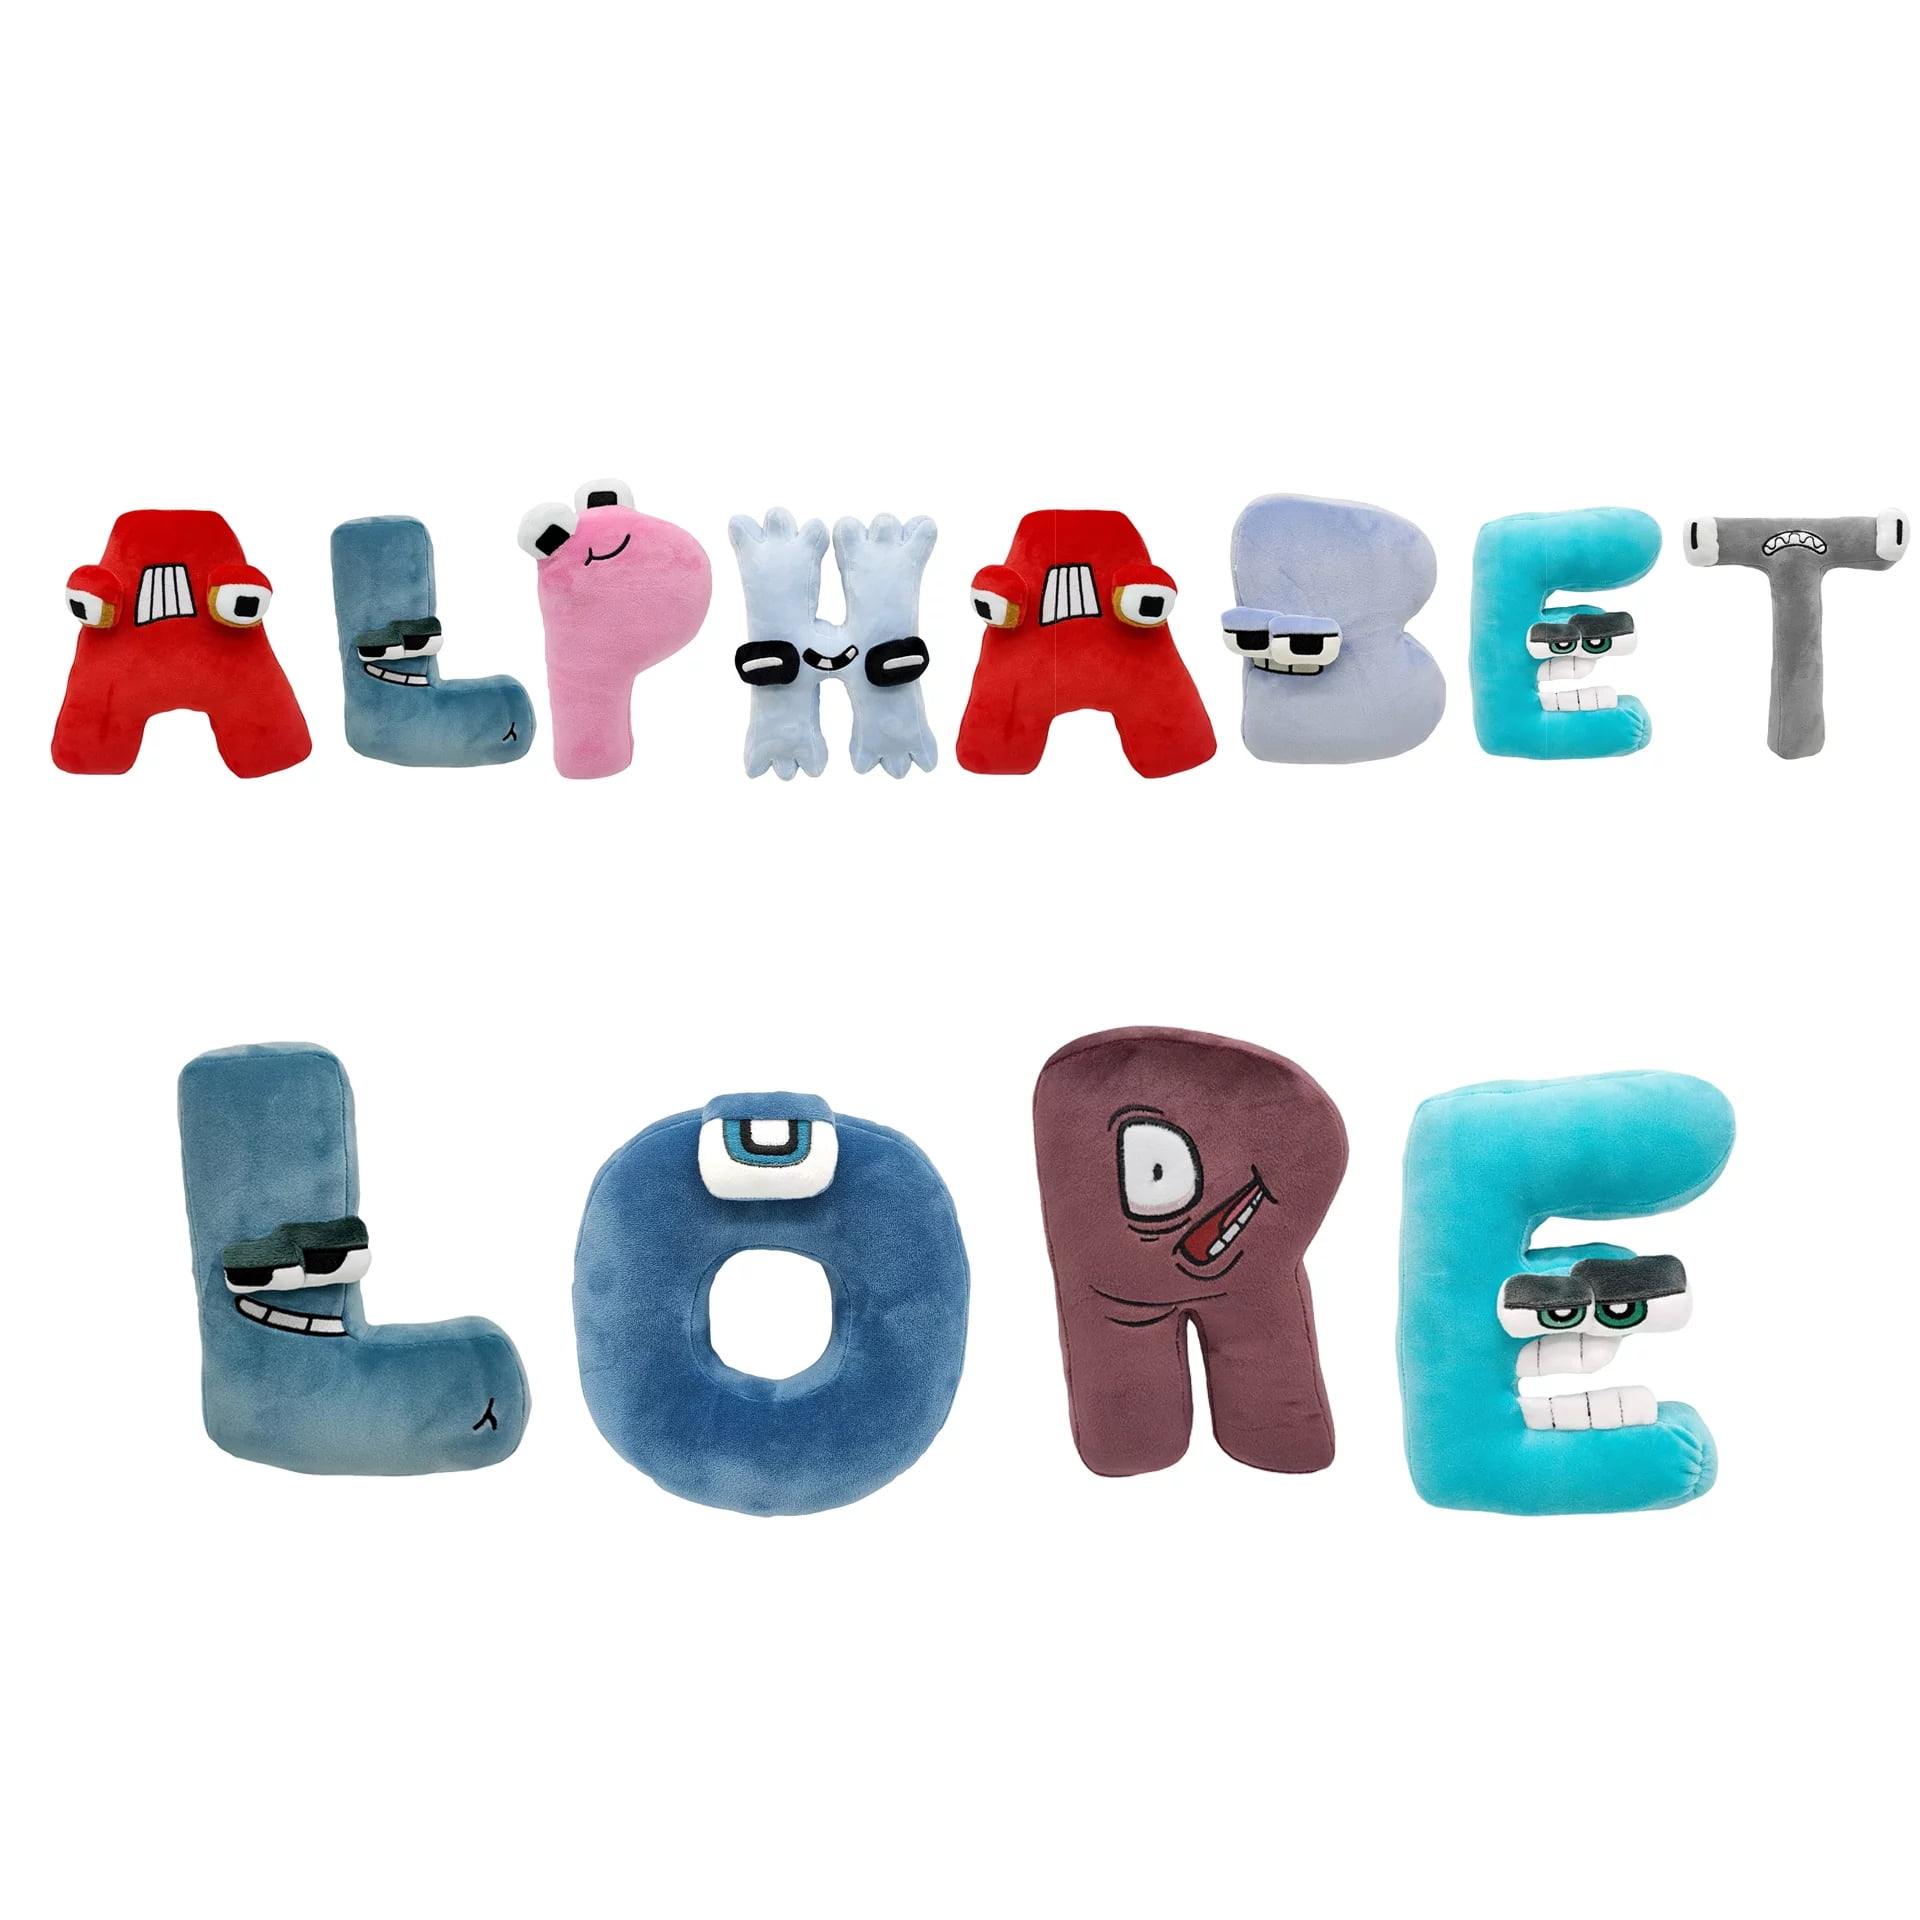 Alphabet Lore Plush Toys, a-z Lowercase Letters Stuffed Dolls, Birthday  Supplies for Kids (b) : : Toys & Games